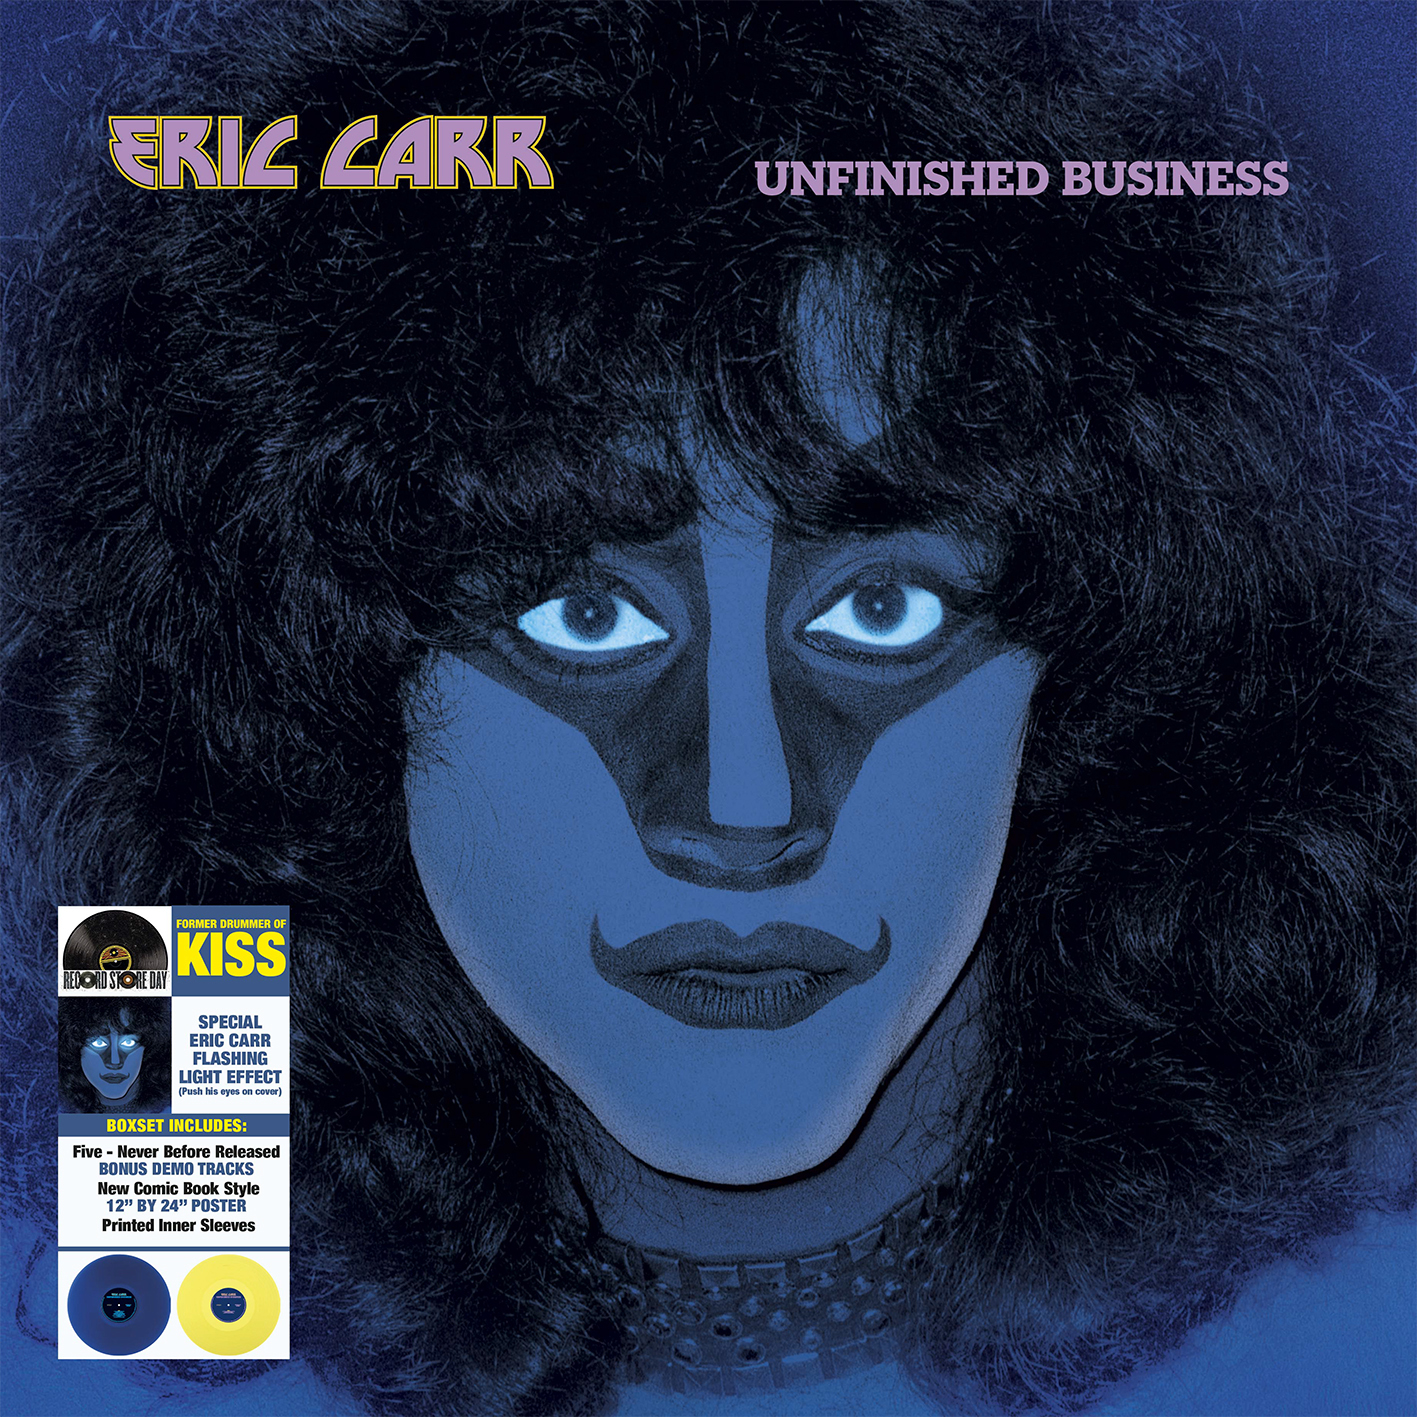 disquaire day - Disquaire Day - Page 2 Cover-Vinyl-Eric-Carr-Unfinished-Business-With-Sticker